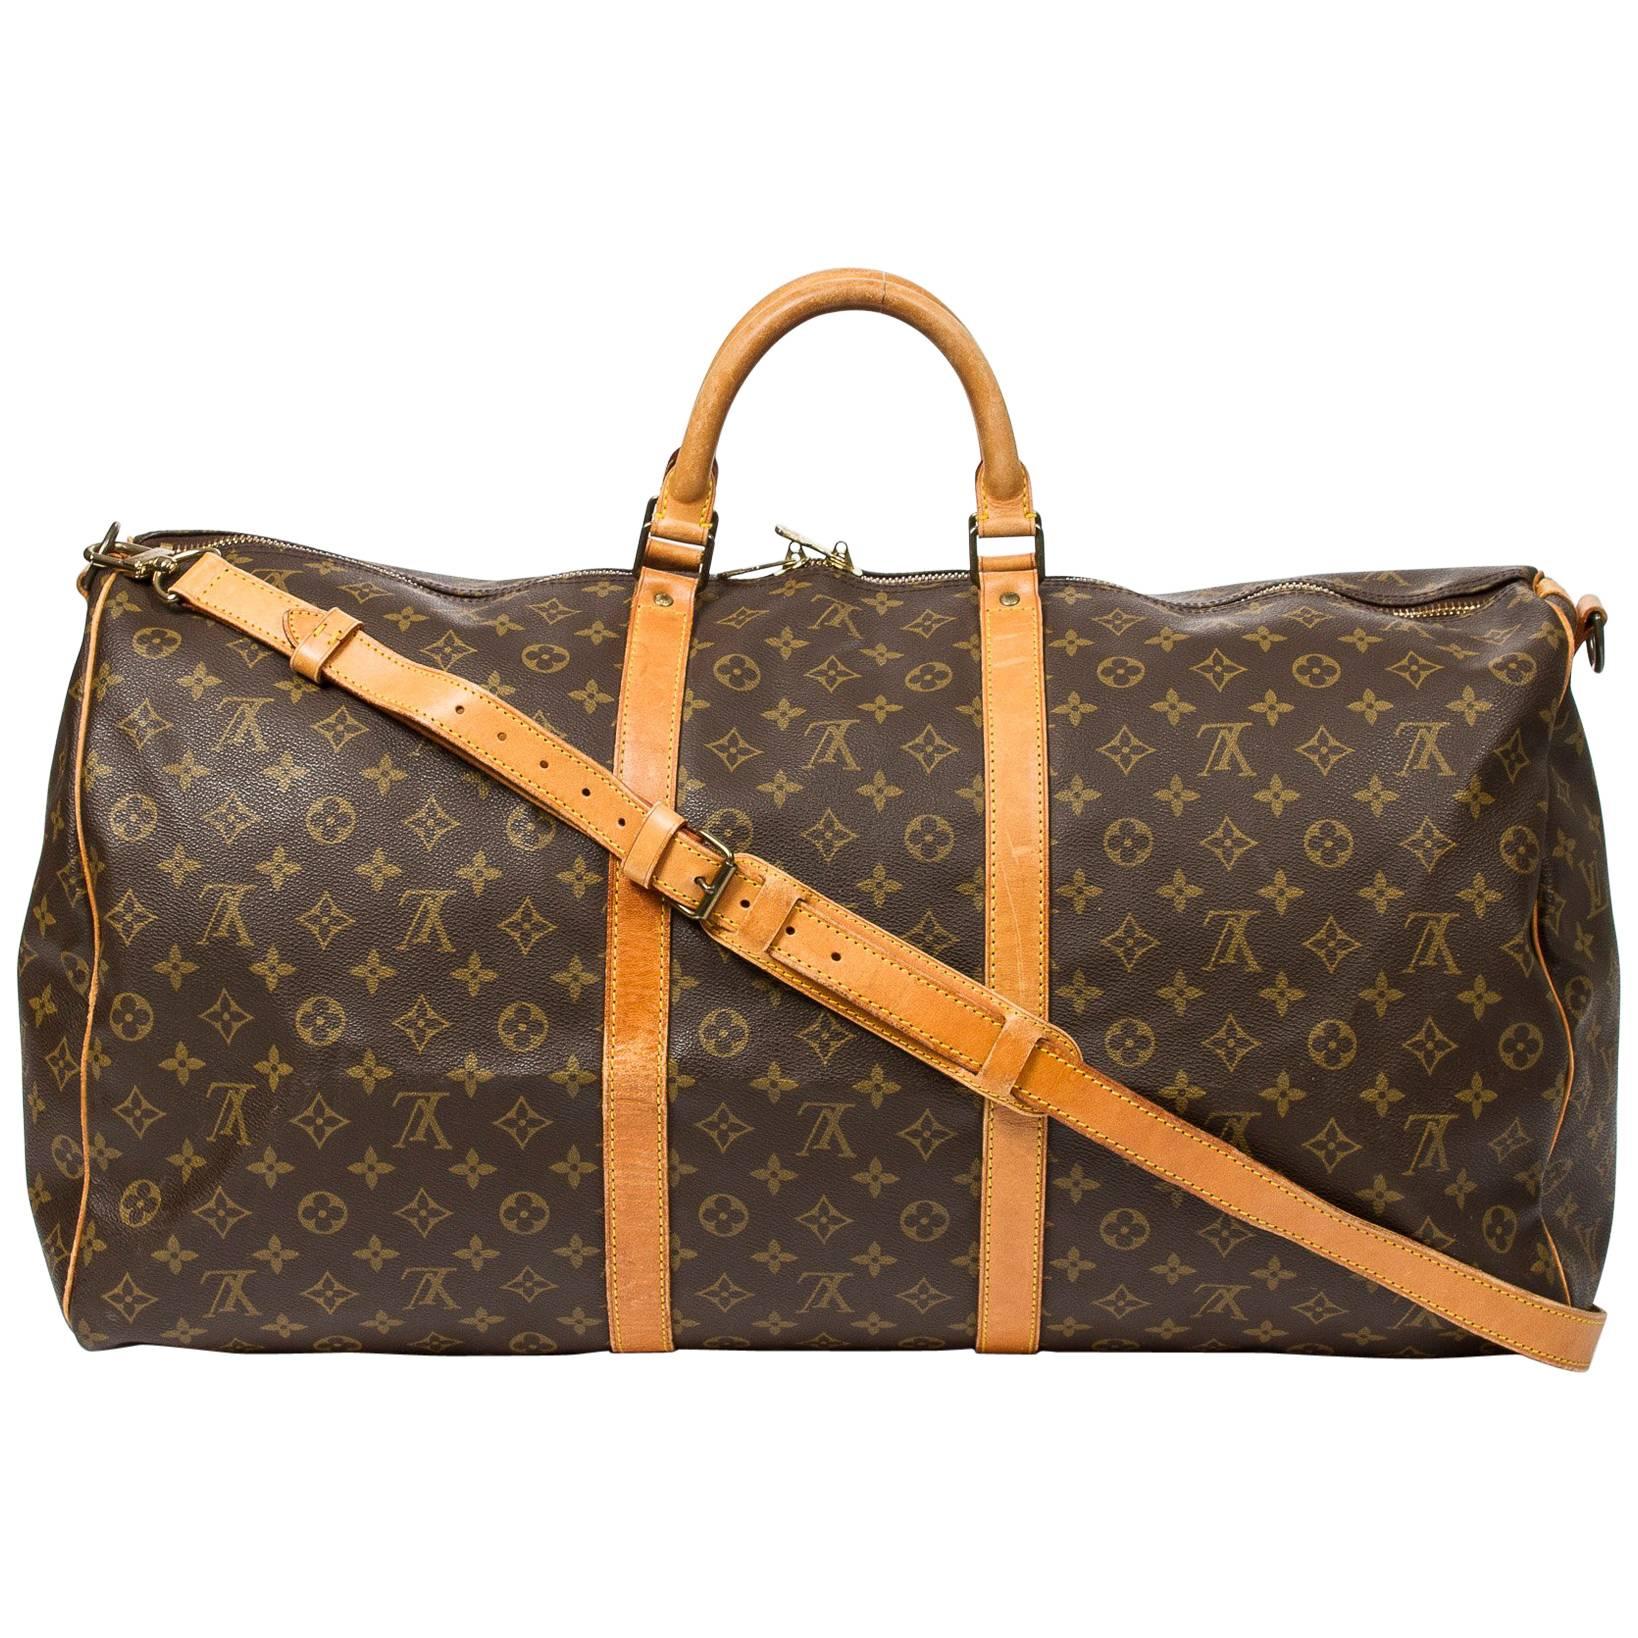 Louis Vuitton Keepall Bandouliere 60 in monogram canvas